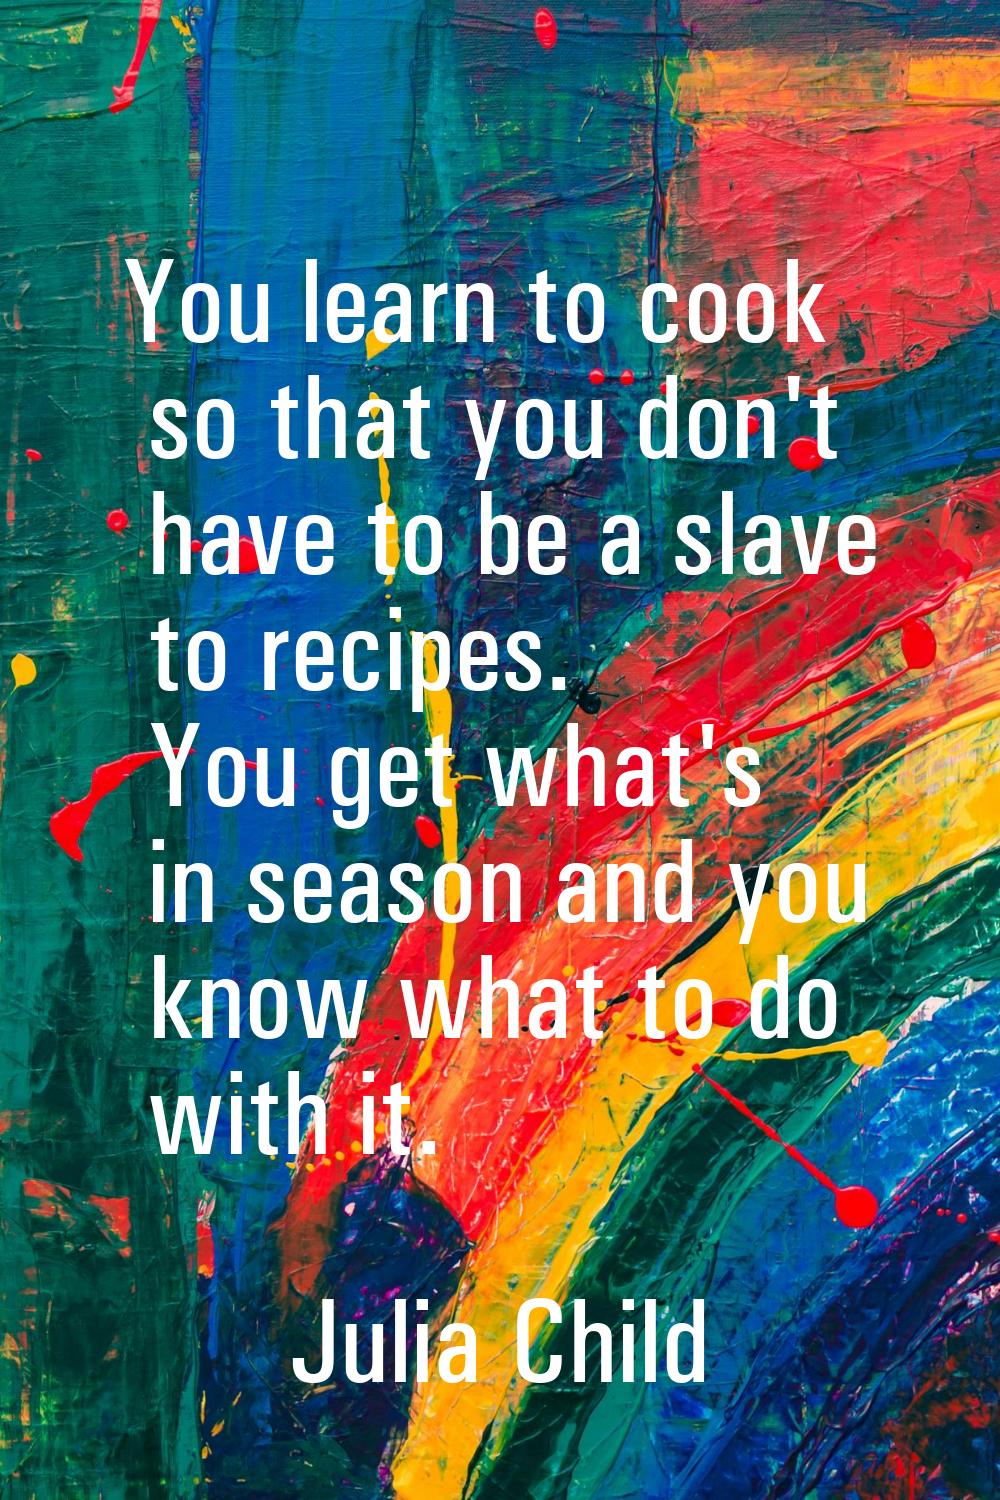 You learn to cook so that you don't have to be a slave to recipes. You get what's in season and you